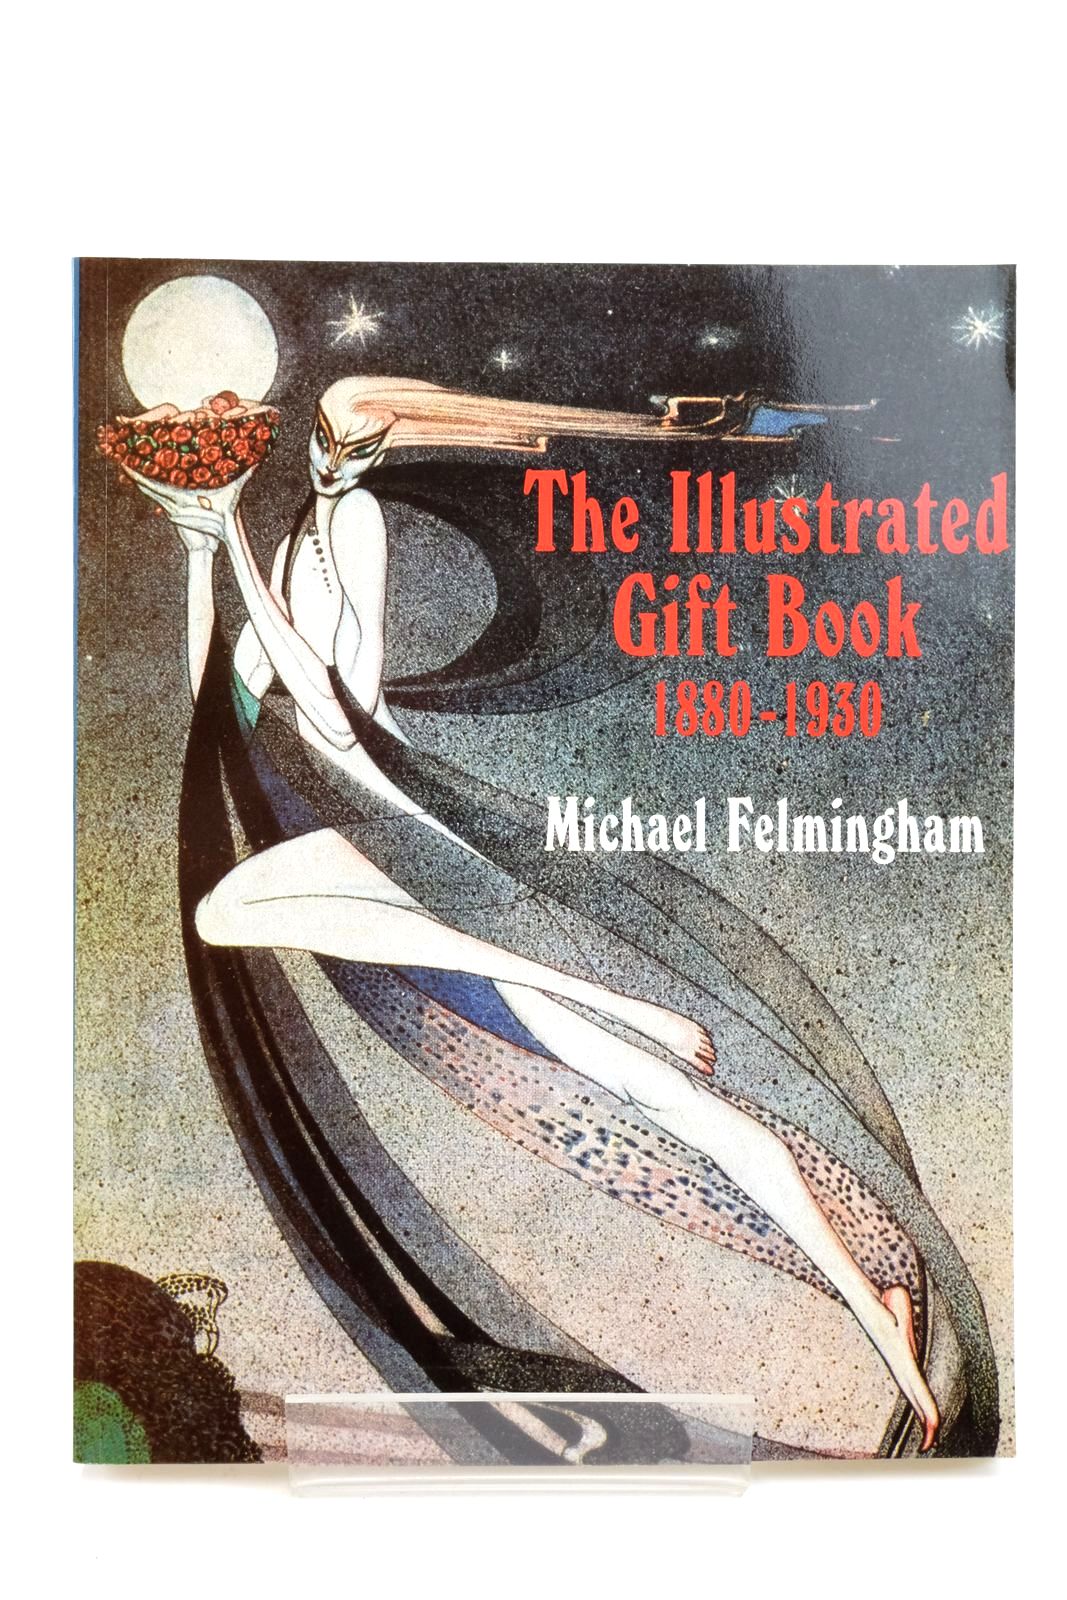 Photo of THE ILLUSTRATED GIFT BOOK 1880-1930 written by Felmingham, Michael published by Wildwood House Ltd. (STOCK CODE: 2138615)  for sale by Stella & Rose's Books